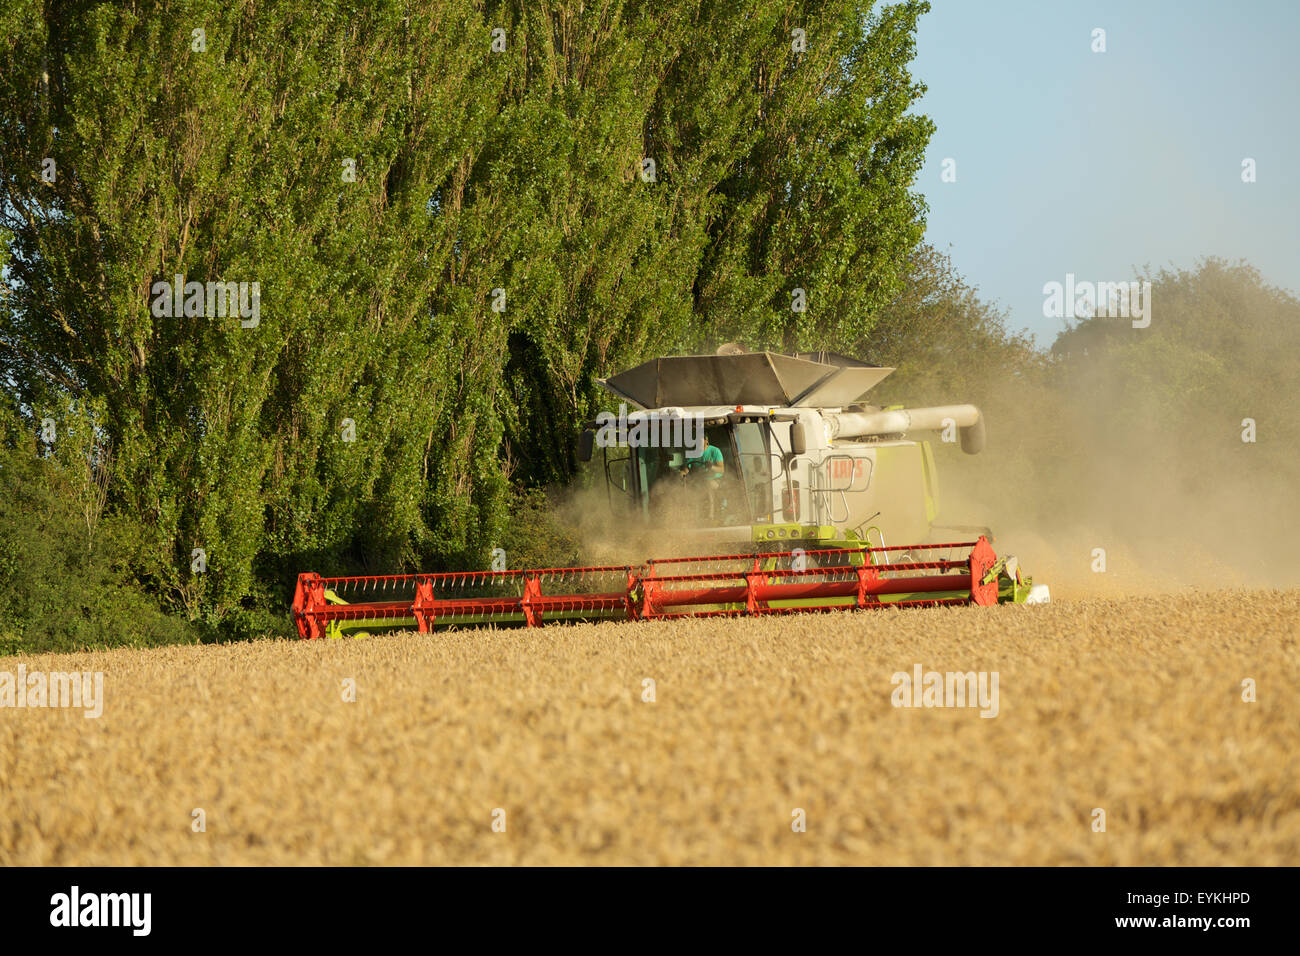 Harvest time in the West Sussex countryside. Combine harvester cutting the wheat crop. Stock Photo